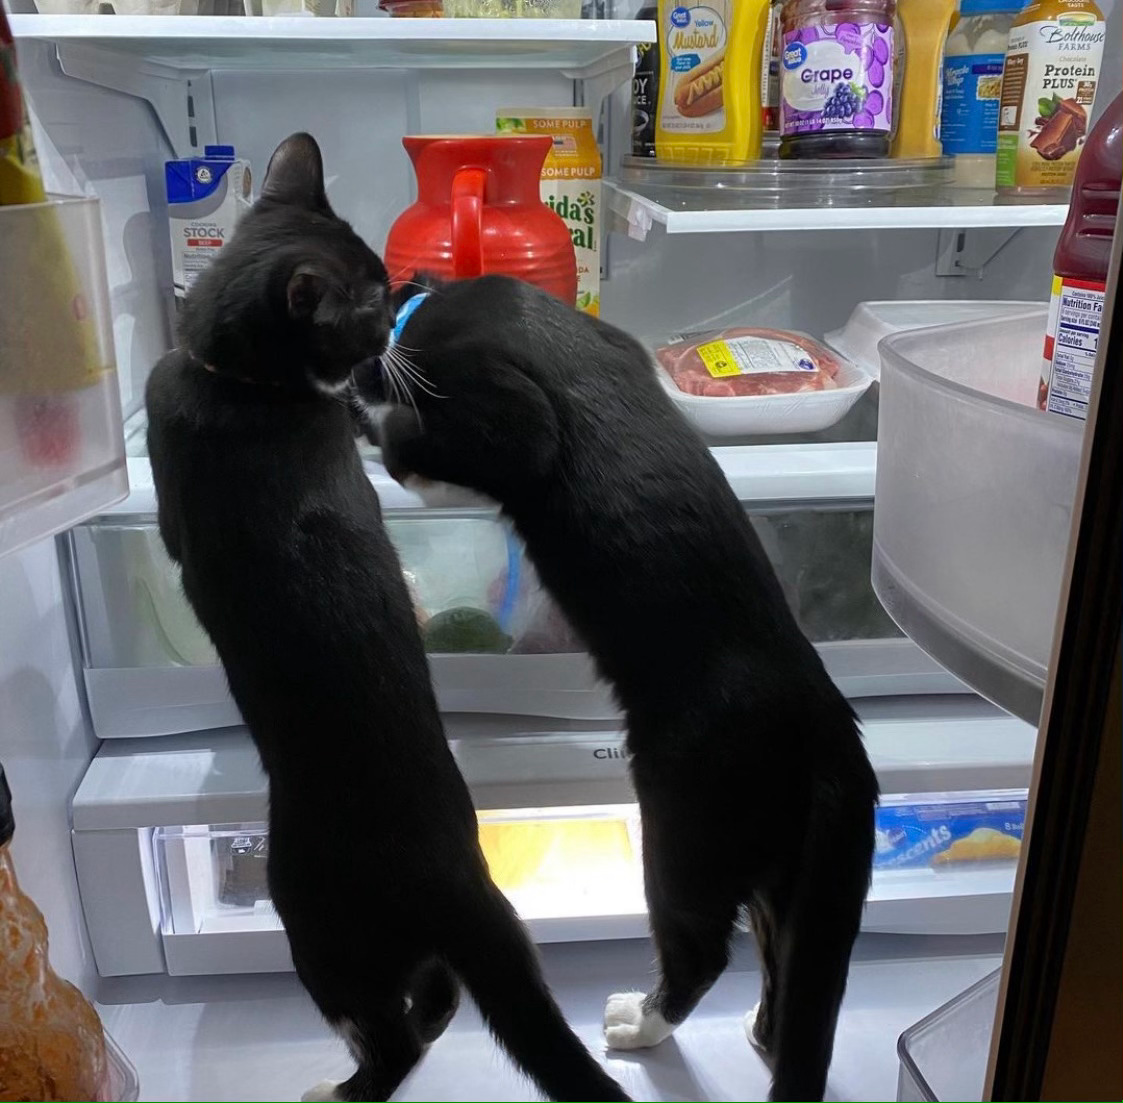 What Can Cats Eat From The Fridge?